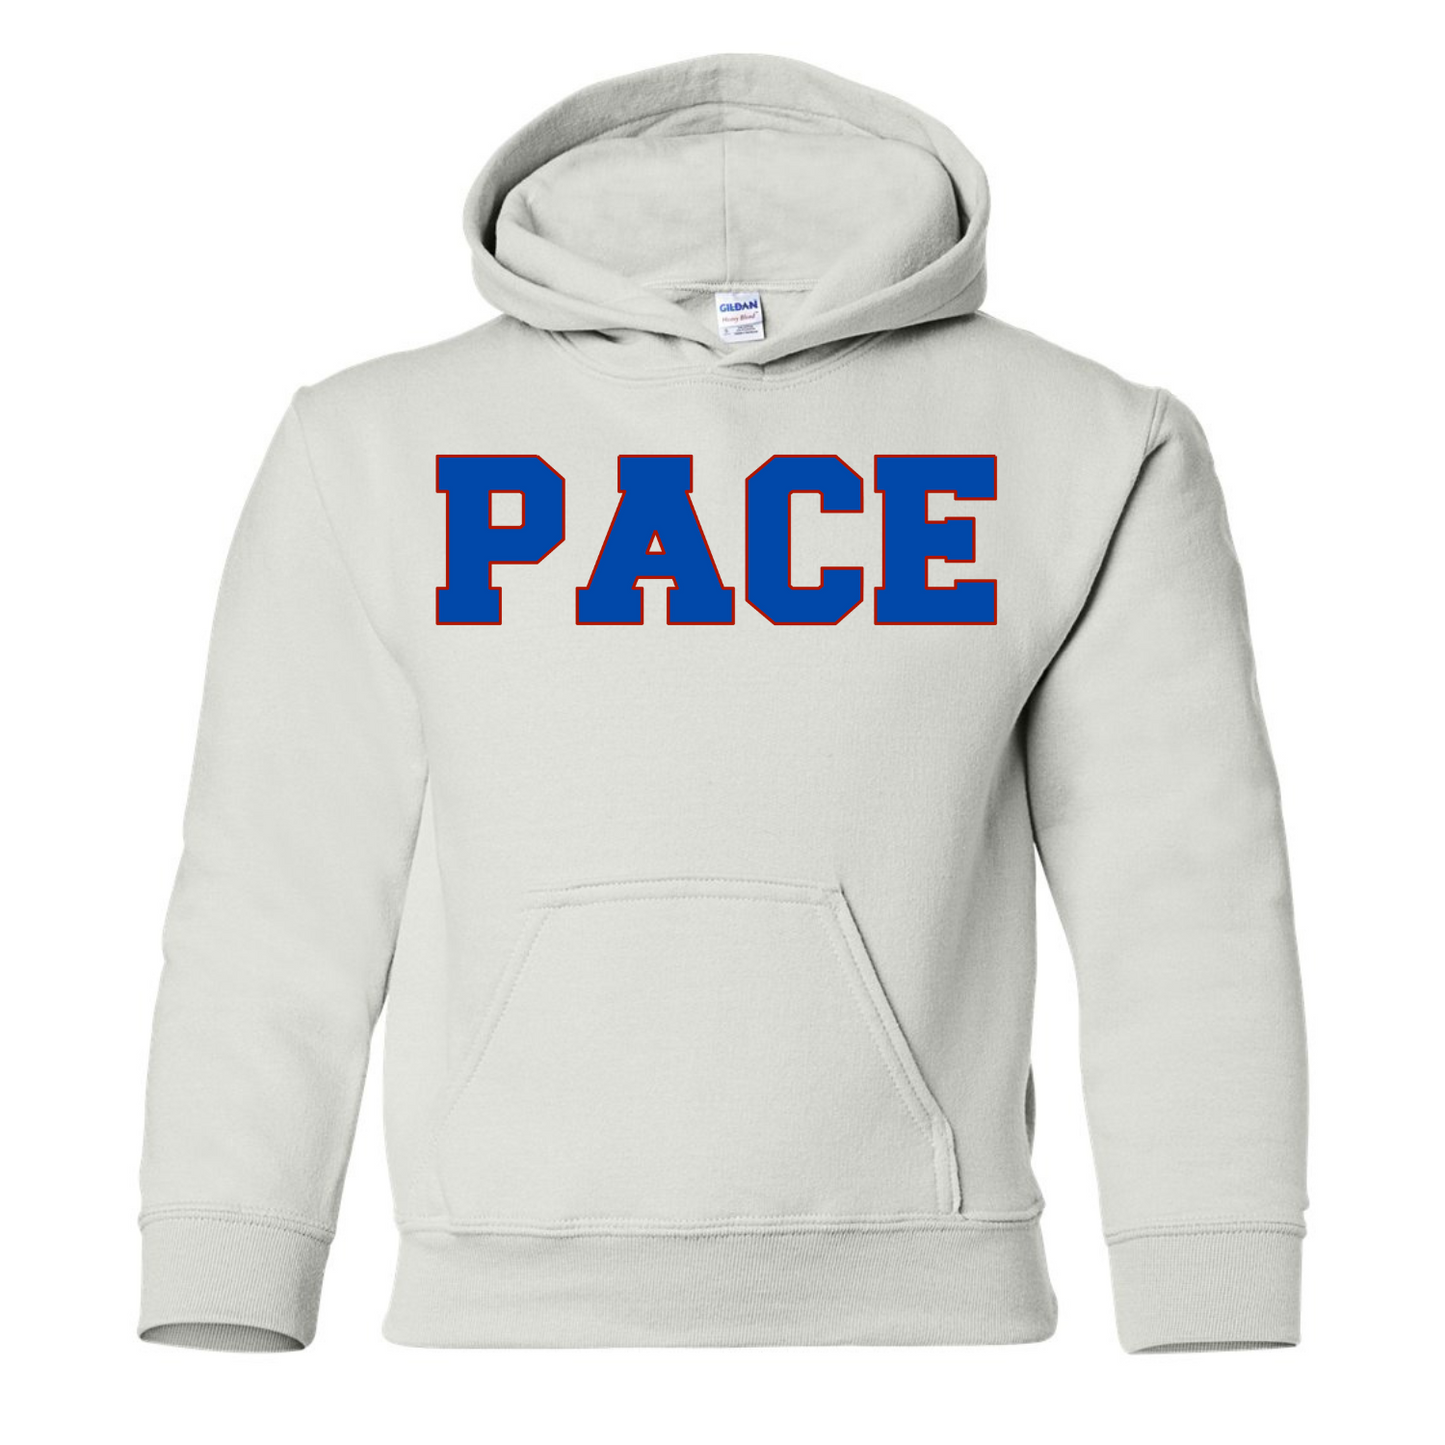 Pace Hoodie Youth